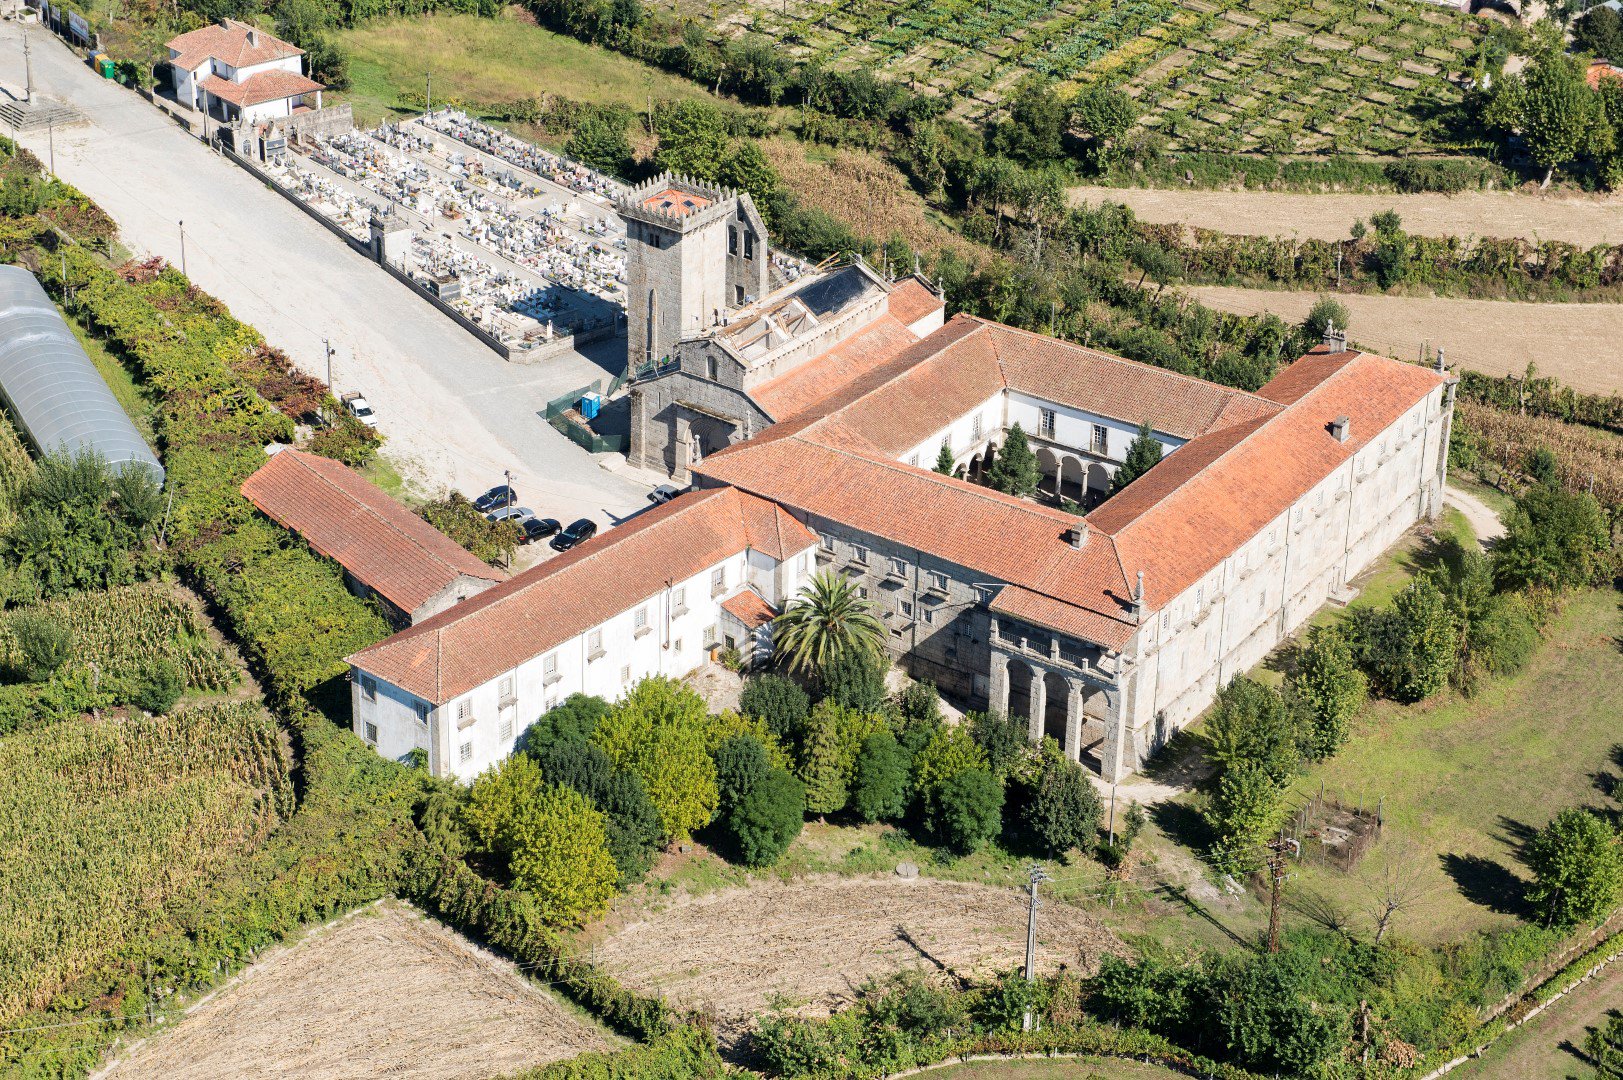 Public tender for the tourist operation of the Monastery of Travanca